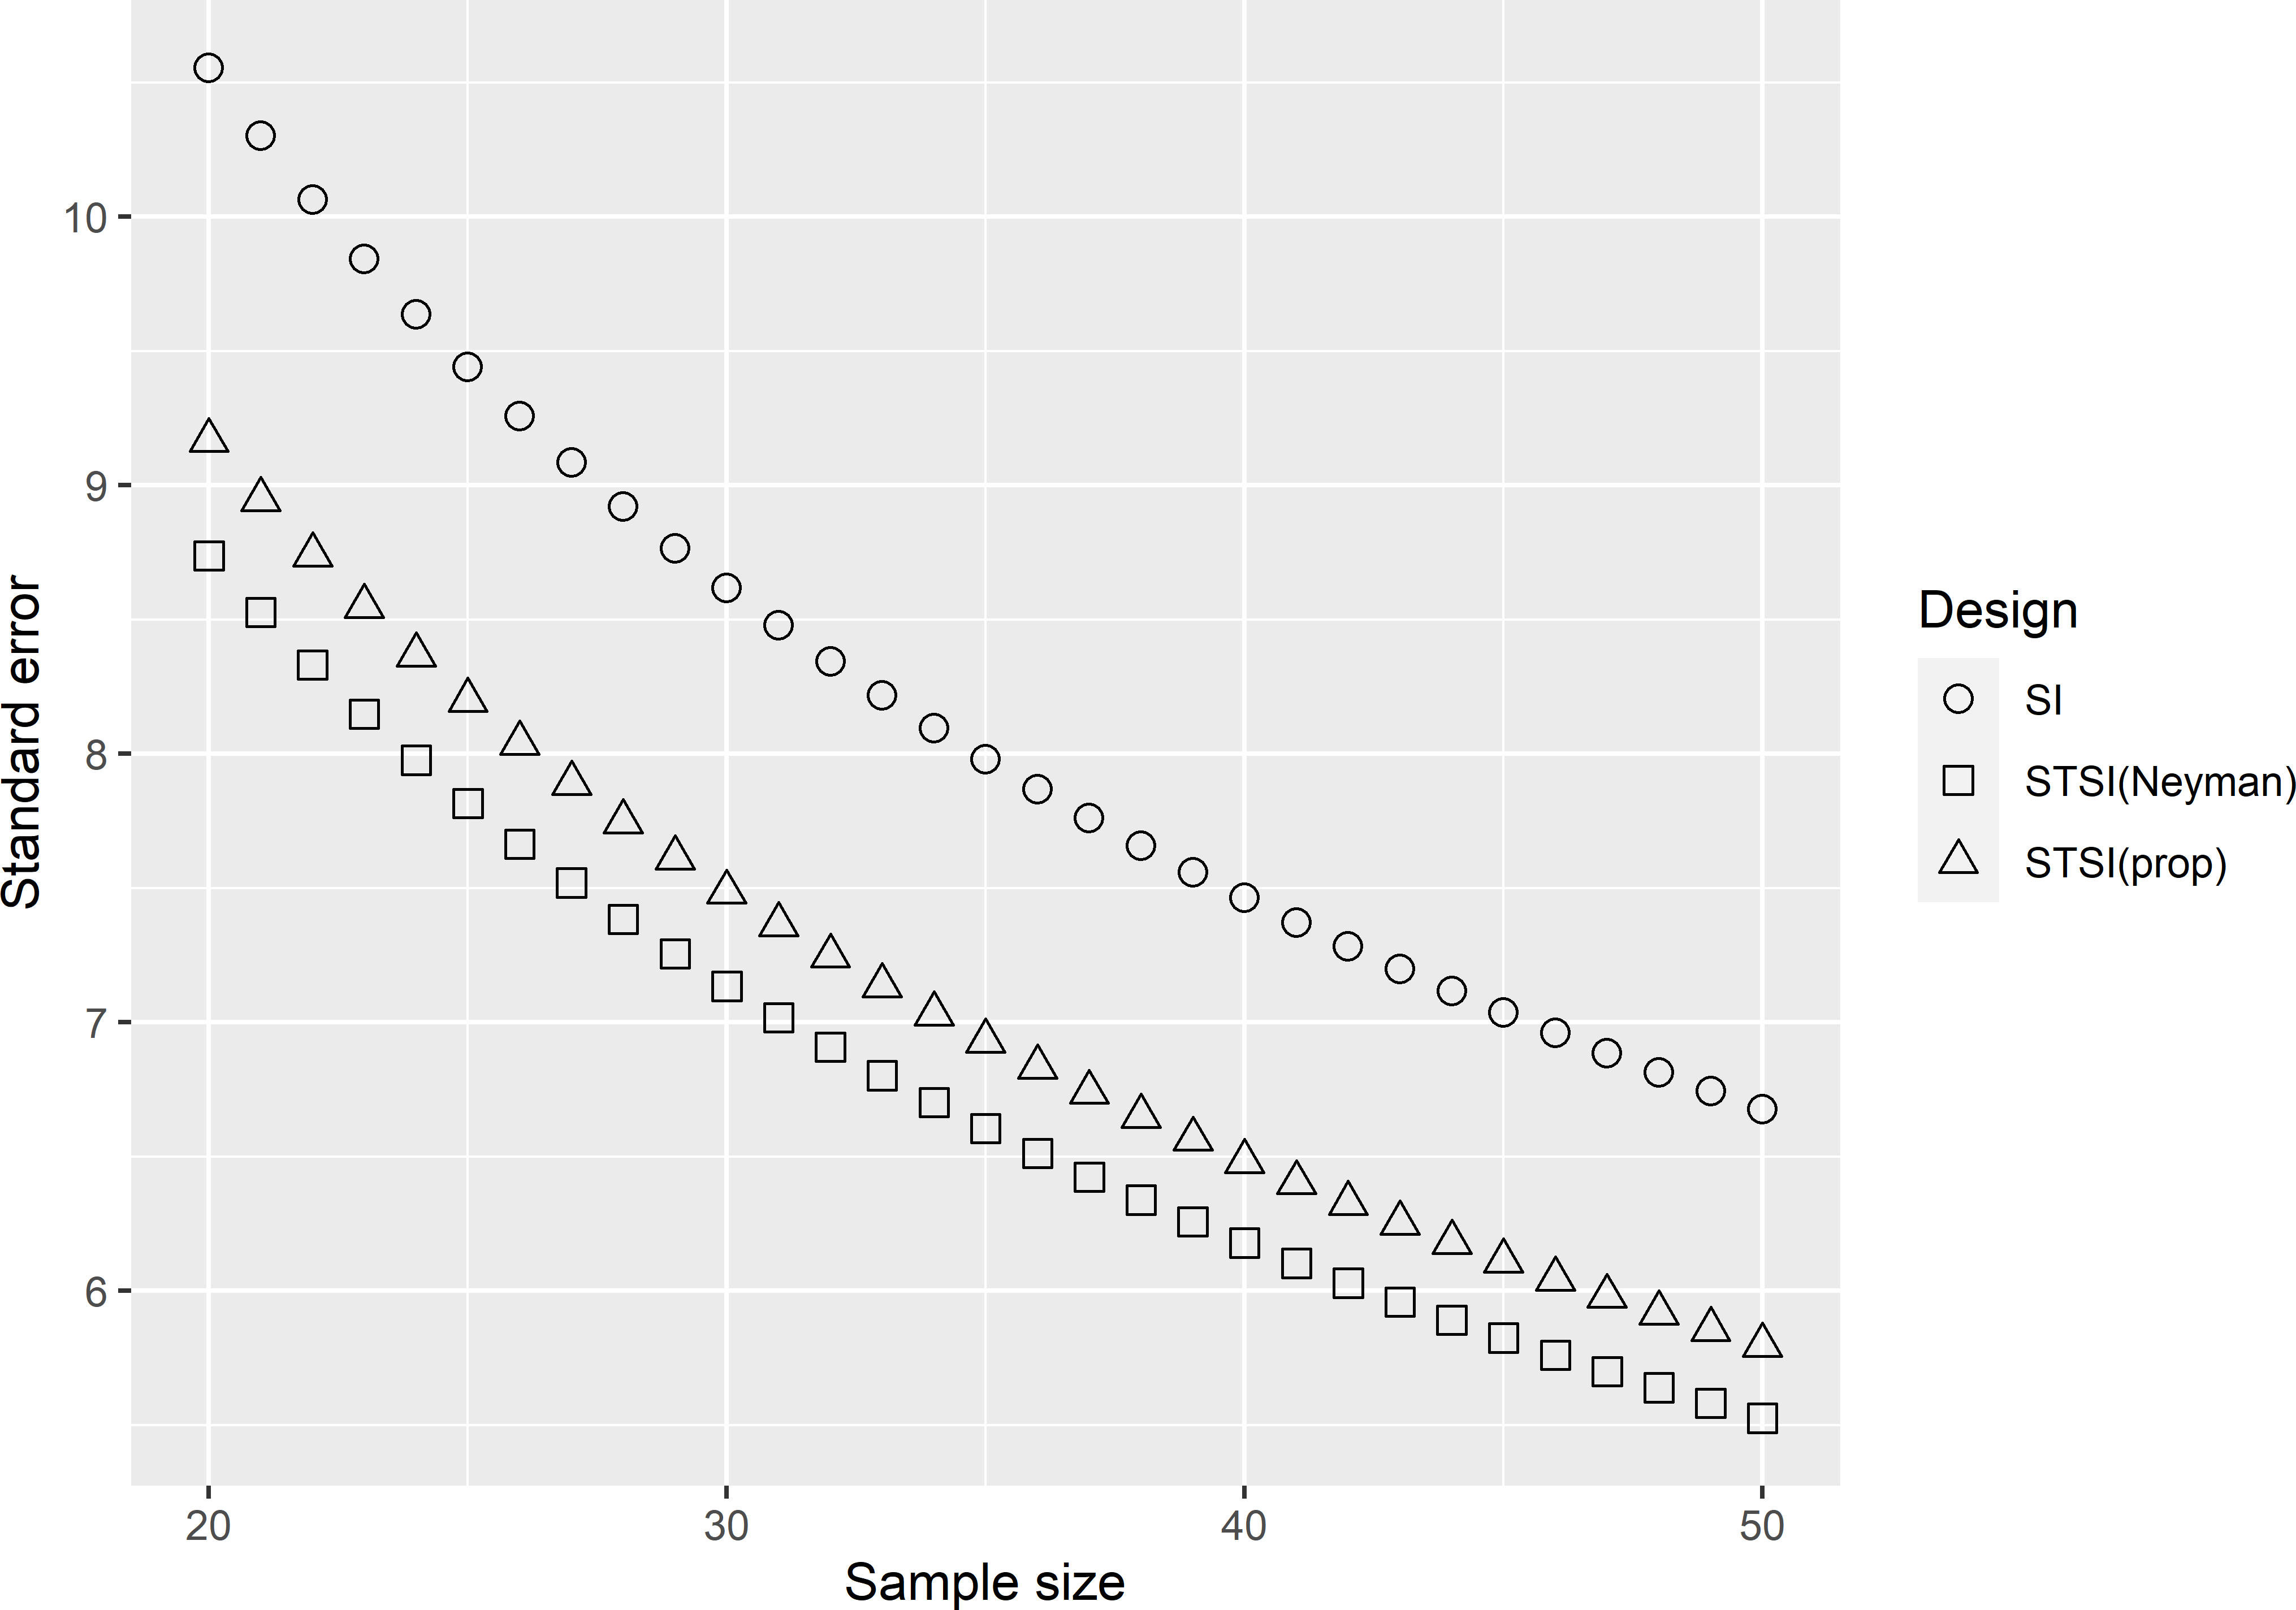 Standard error of the \(\pi\) estimator of the mean SOM concentration (g kg-1) as a function of the total sample size, for simple random sampling (SI) and for stratified simple random sampling with proportional (STSI(prop)) and Neyman allocation (STSI(Neyman)) for Voorst.